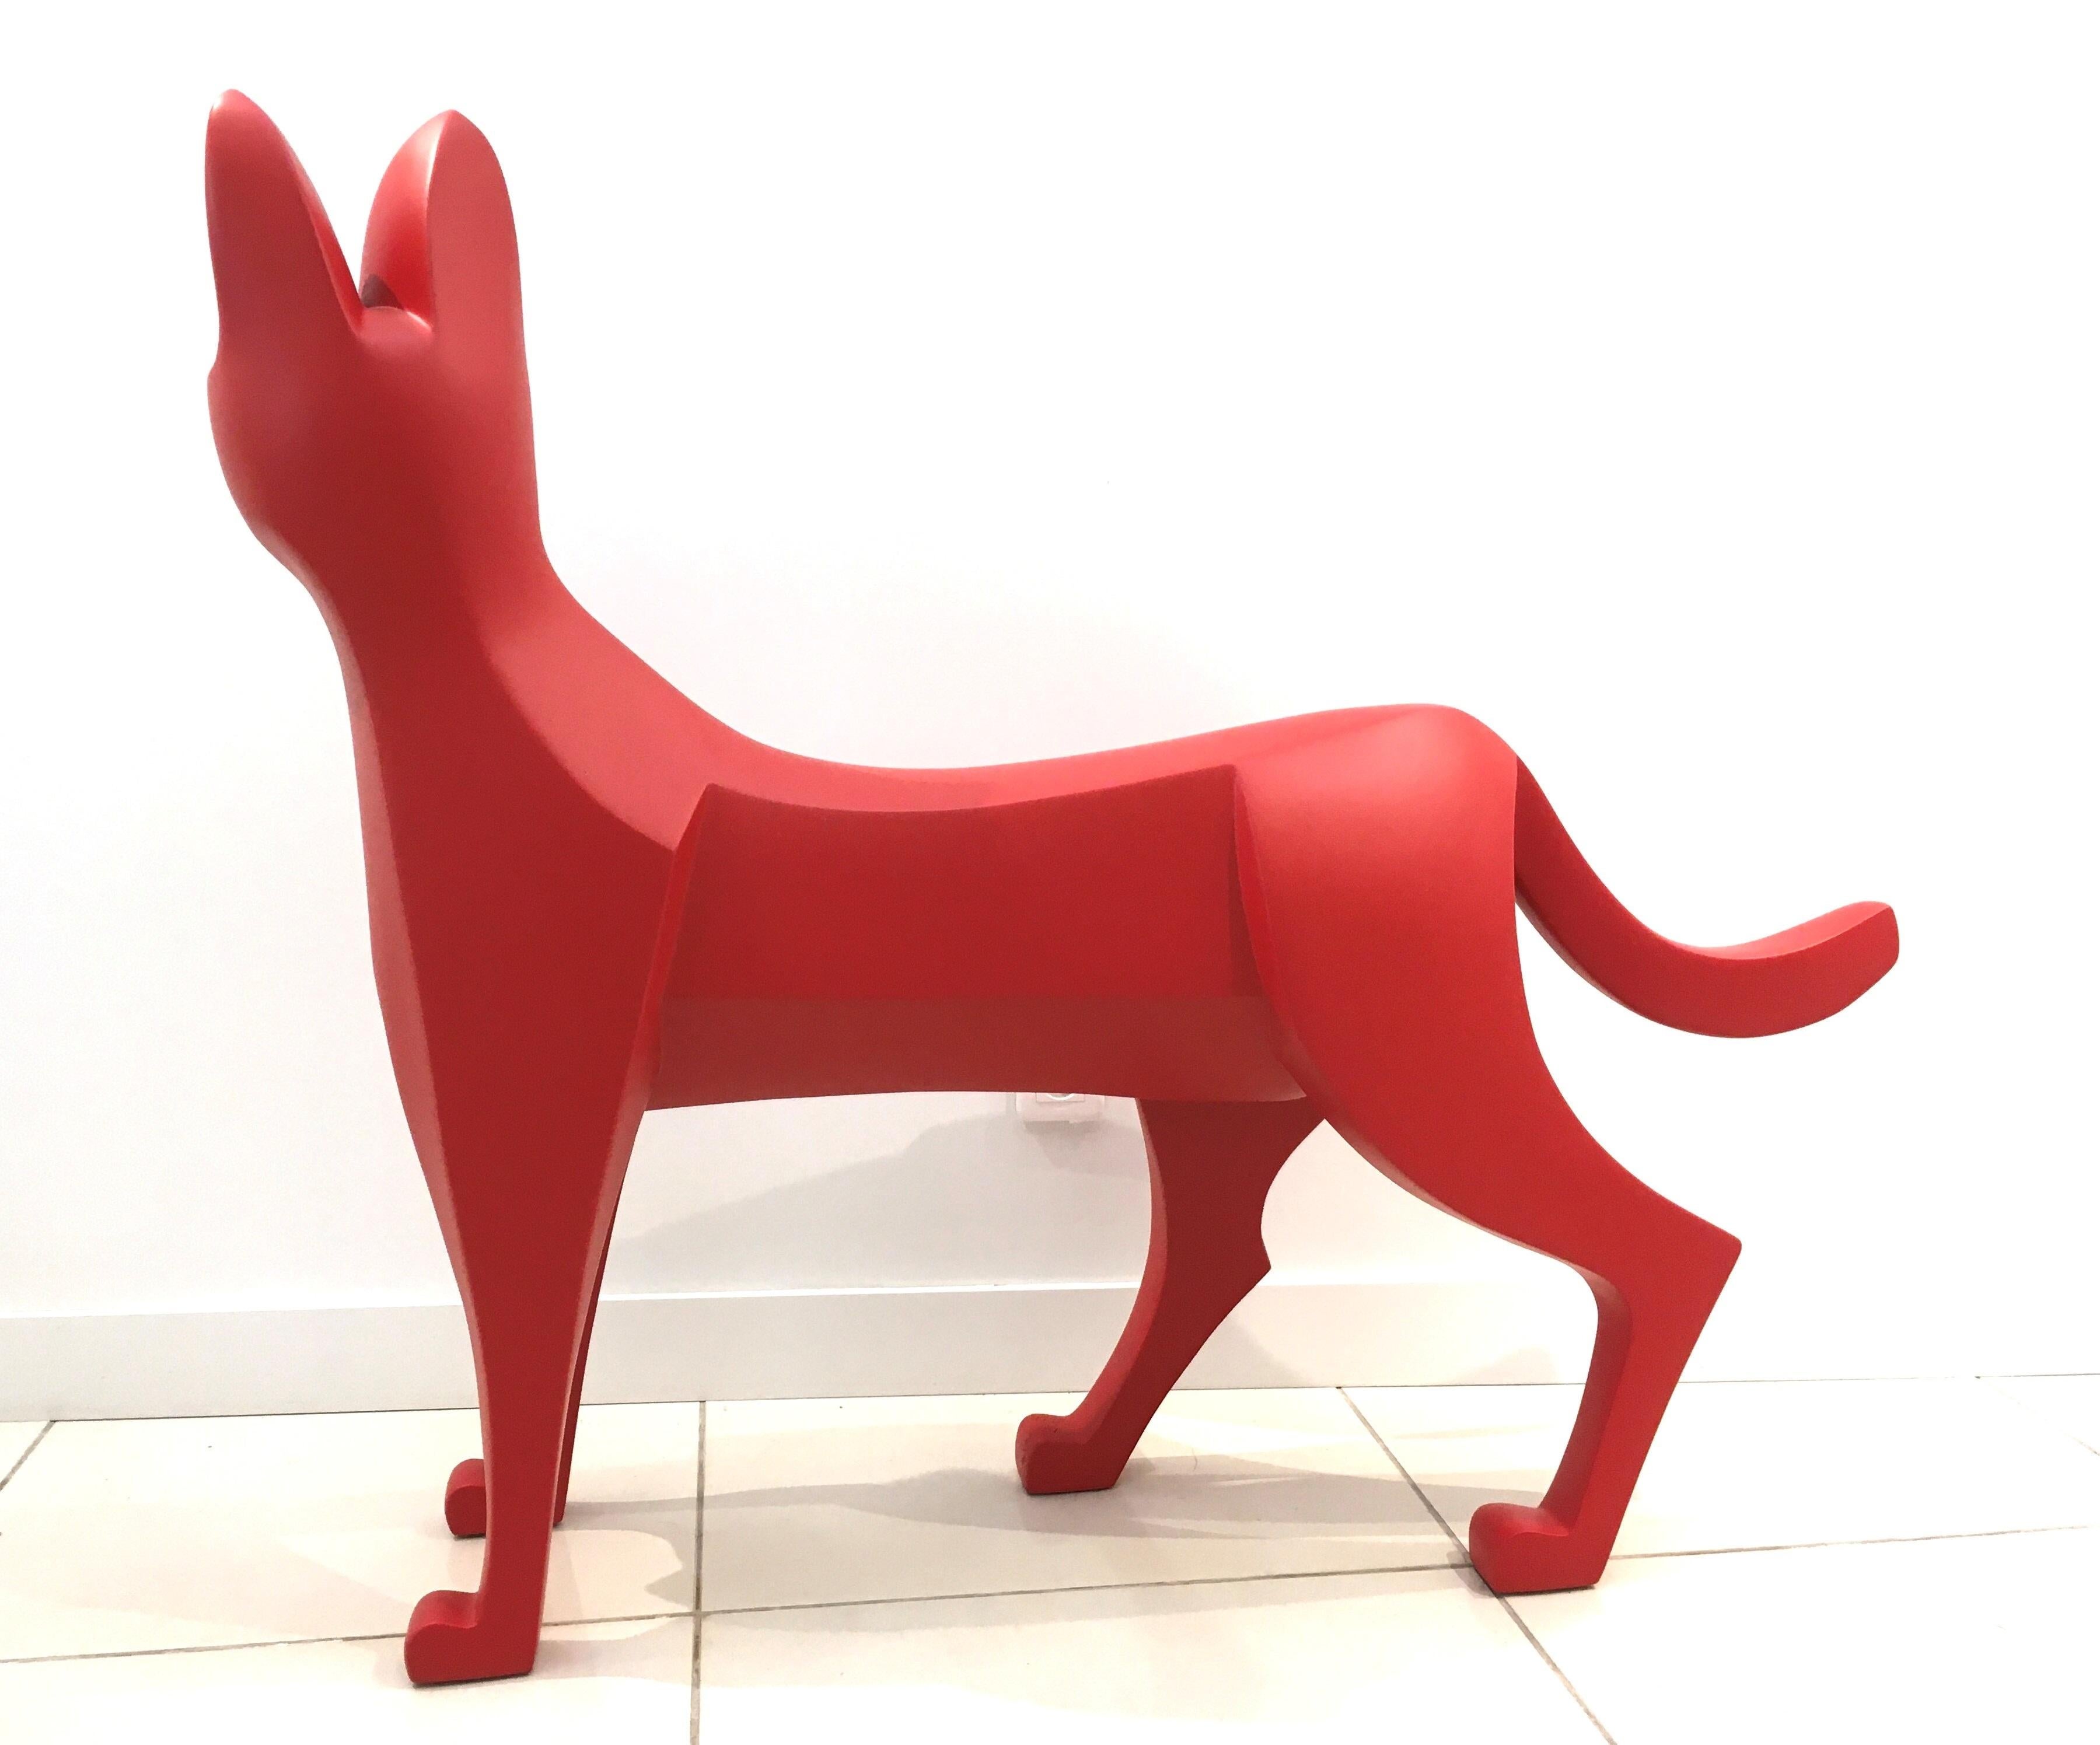 The Serval by Eric Valat - Sculpture and bench in colored polyester For Sale 4